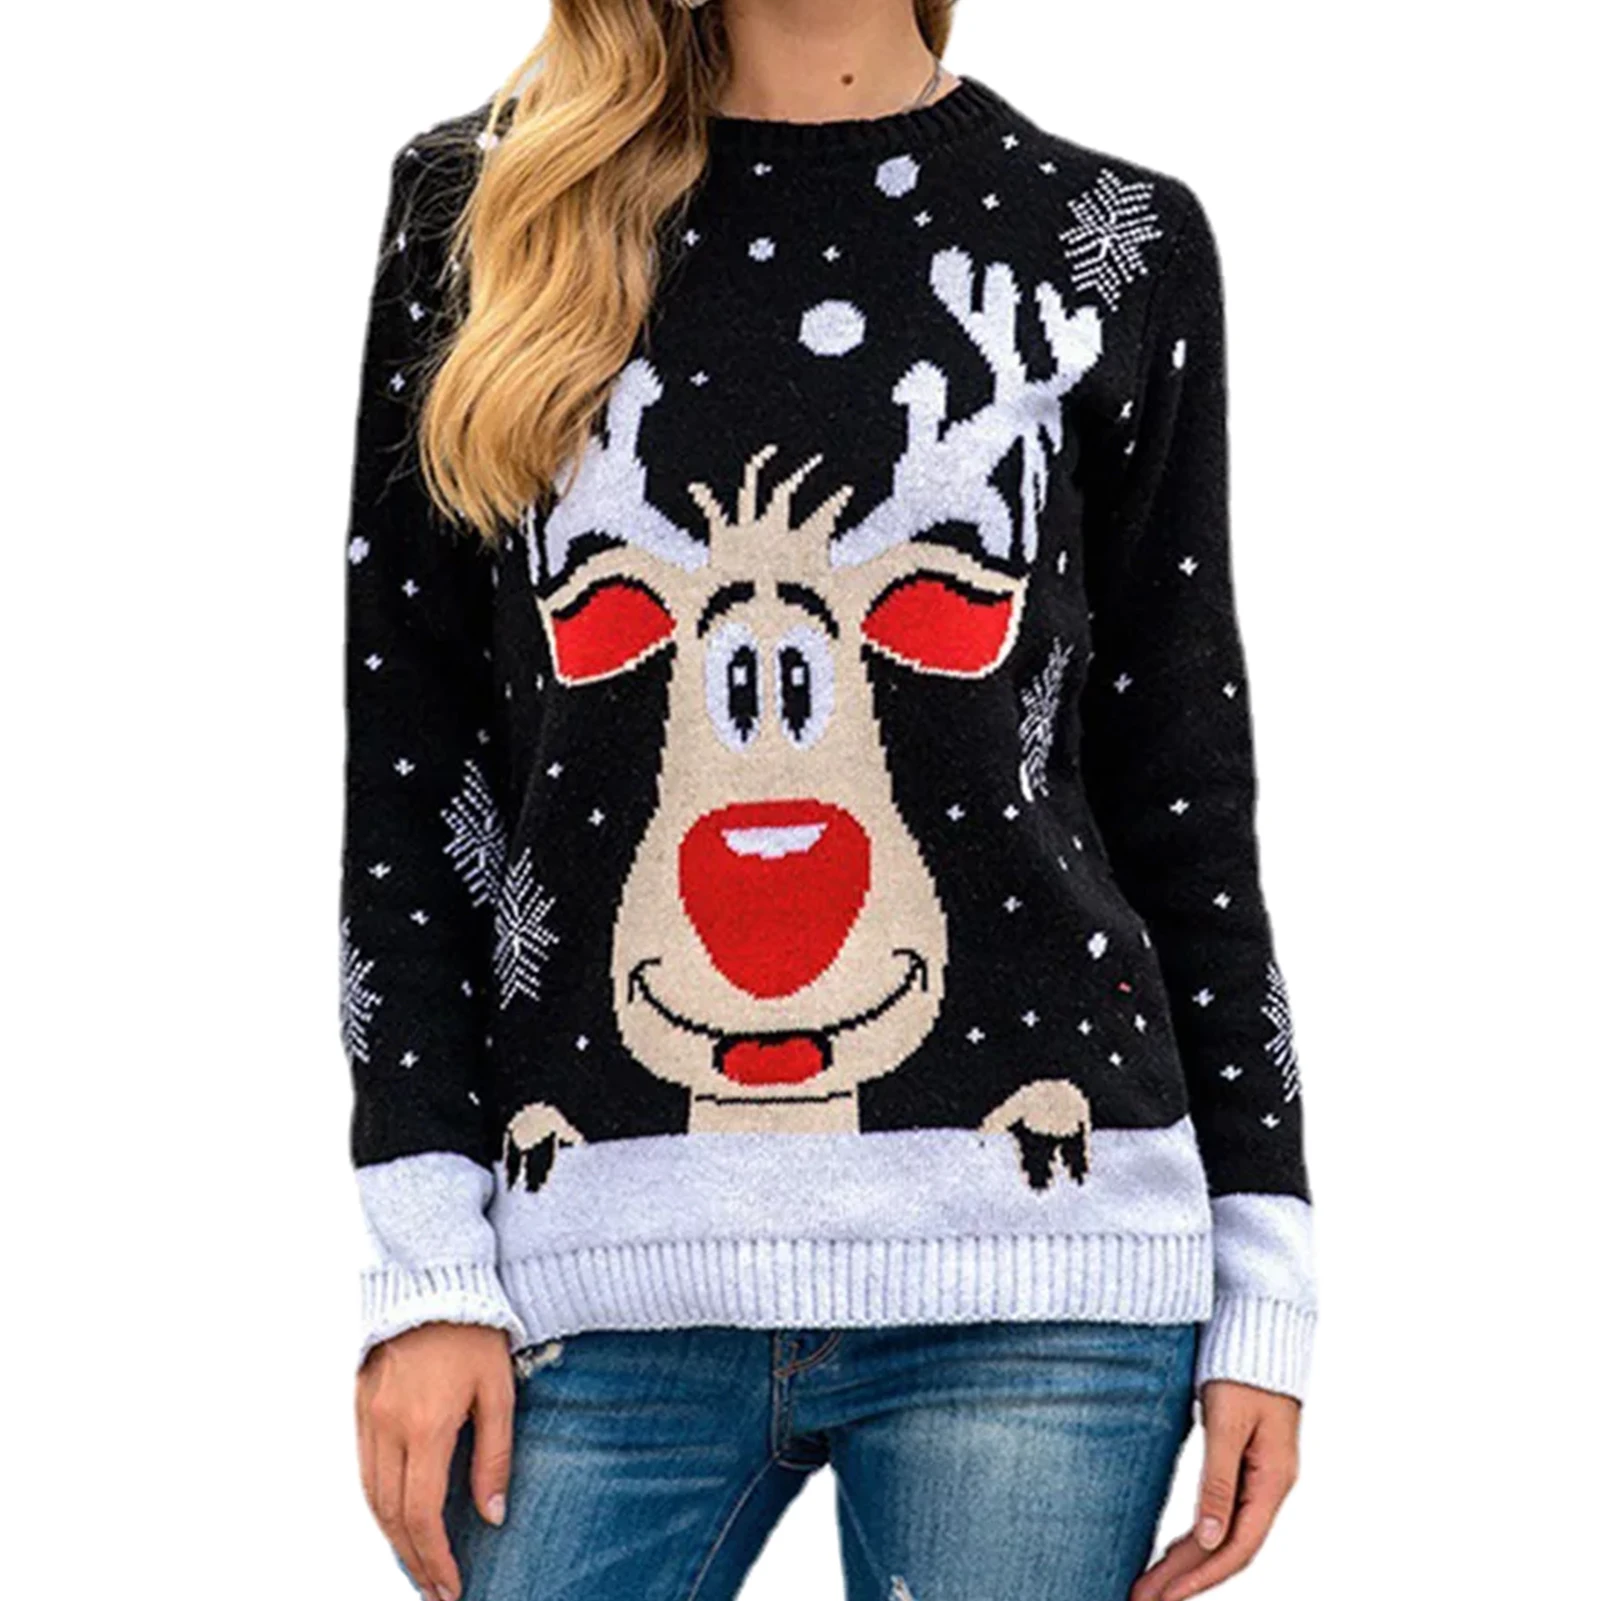 

Gift Daily Pullover Jacquard Women Knit Sweater Festival Bottoming Casual Crew Neck Fashion Autumn Winter Cute Christmas Fawn